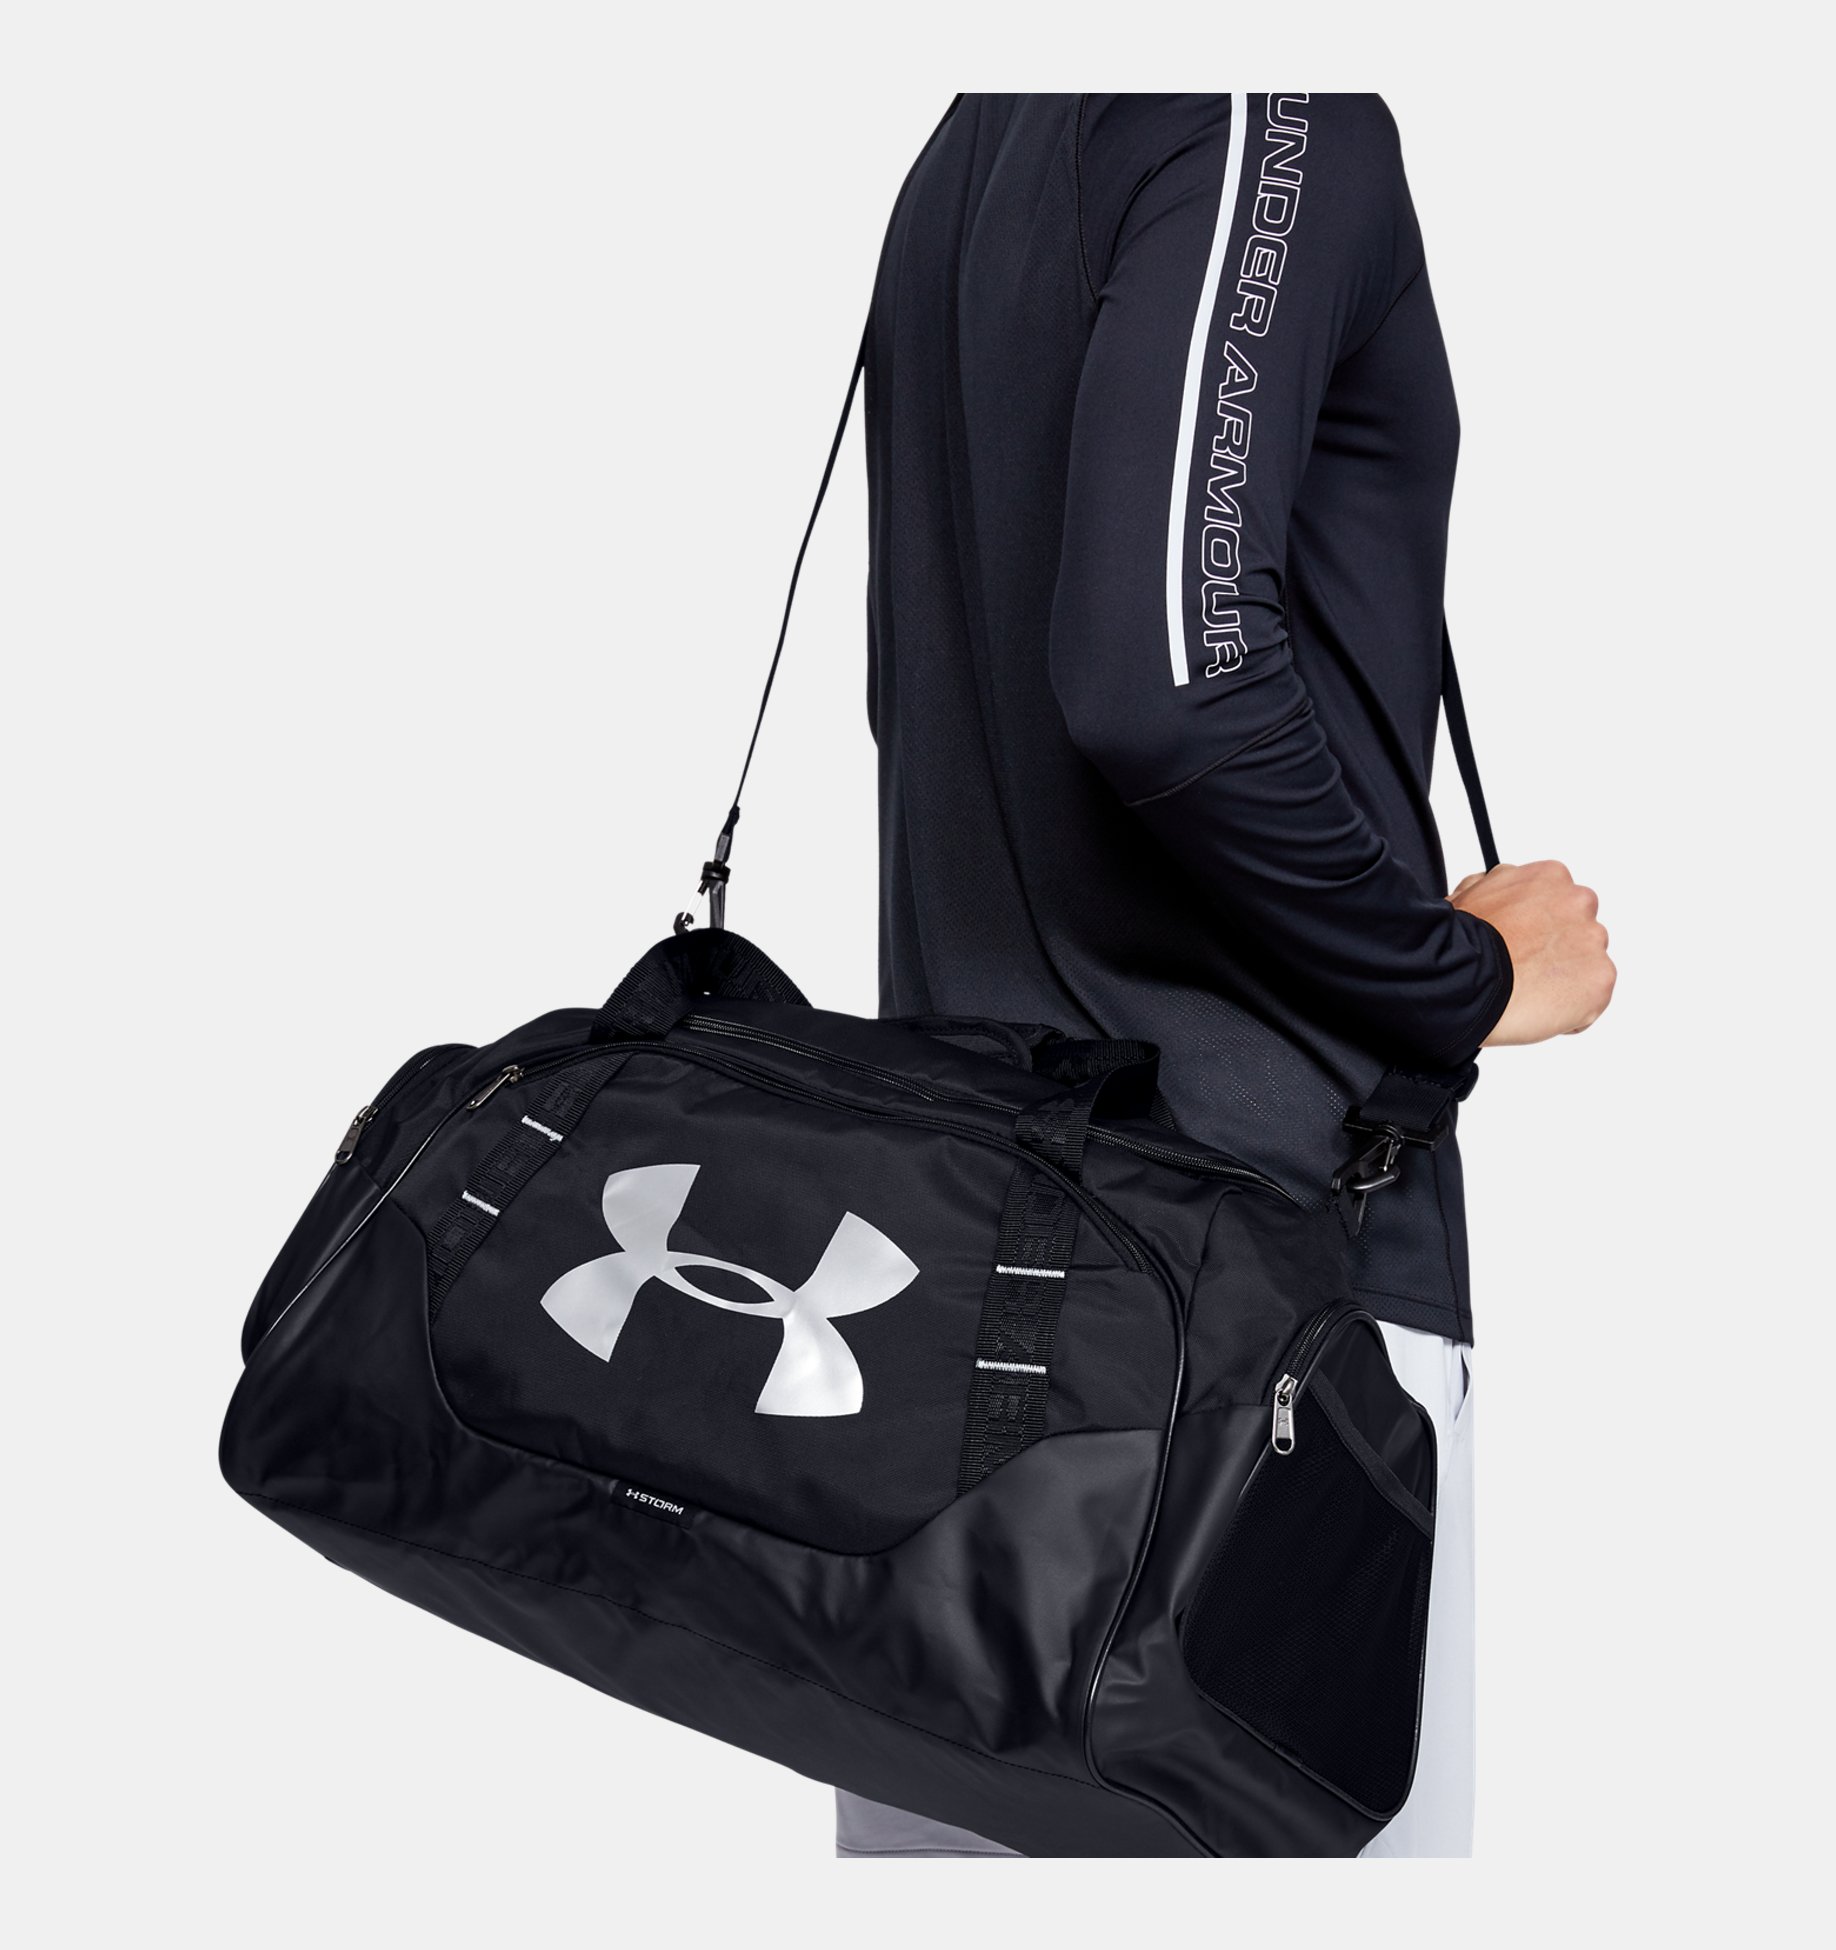 Under Armour Undeniable 3.0 Medium Duffel Royal and Silver 